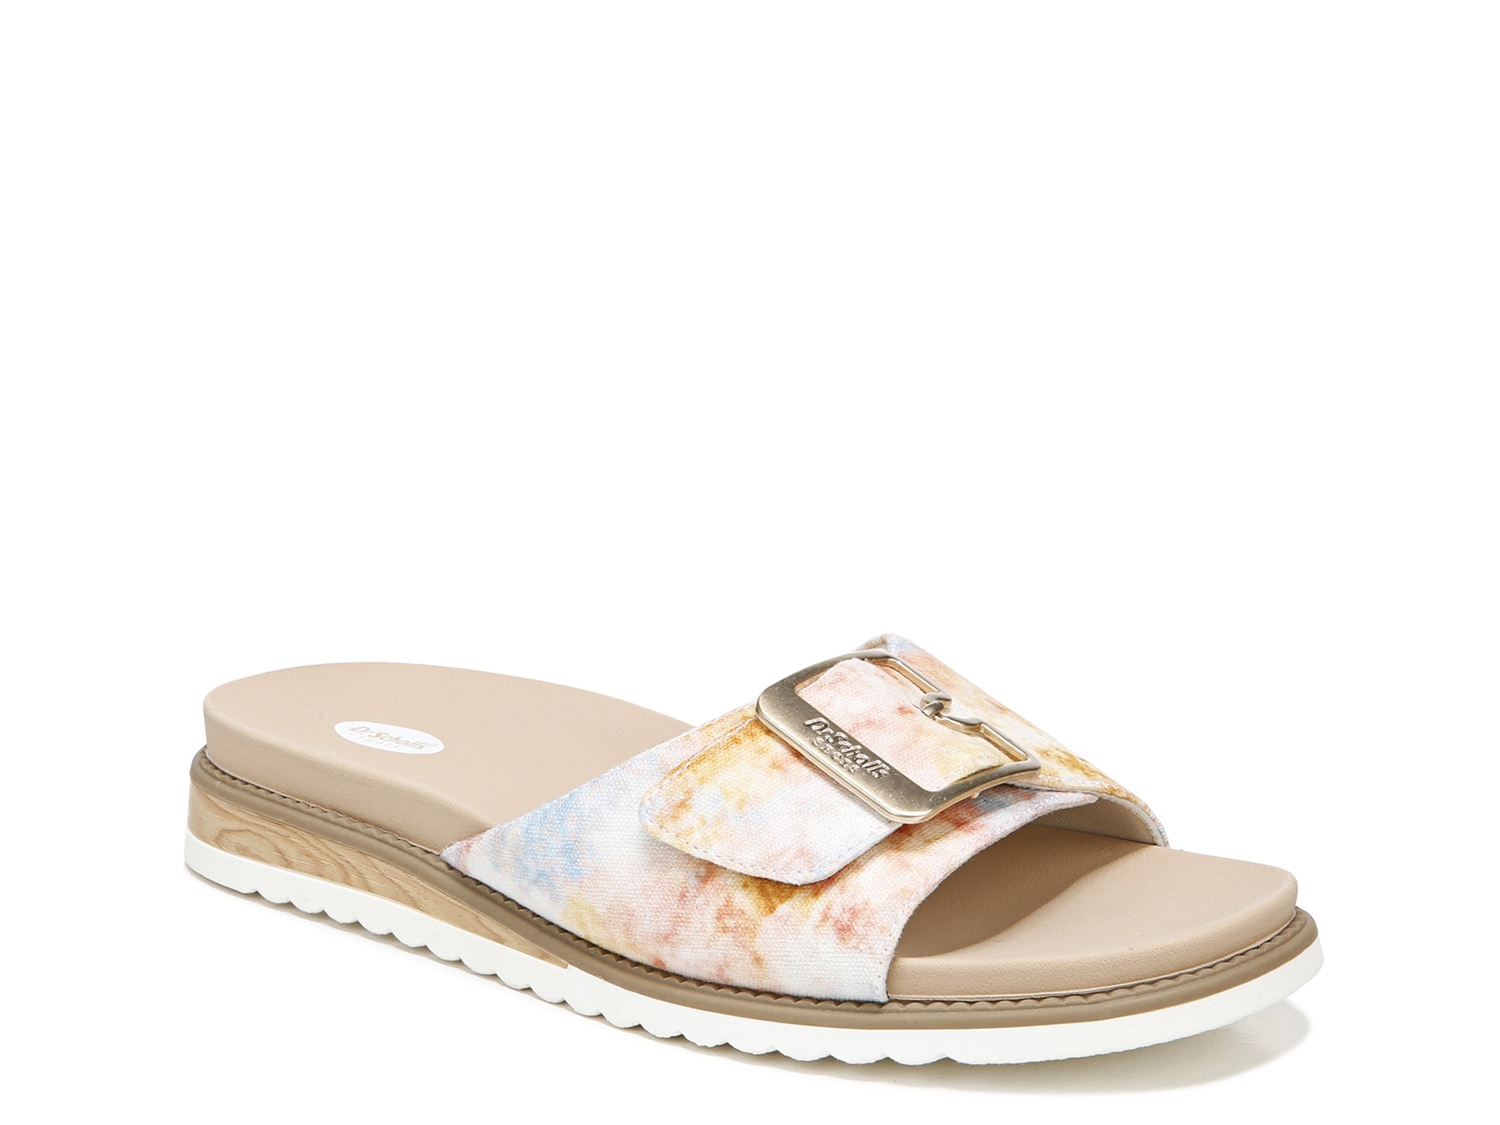 Women's Clearance Sandals up to 50% off 